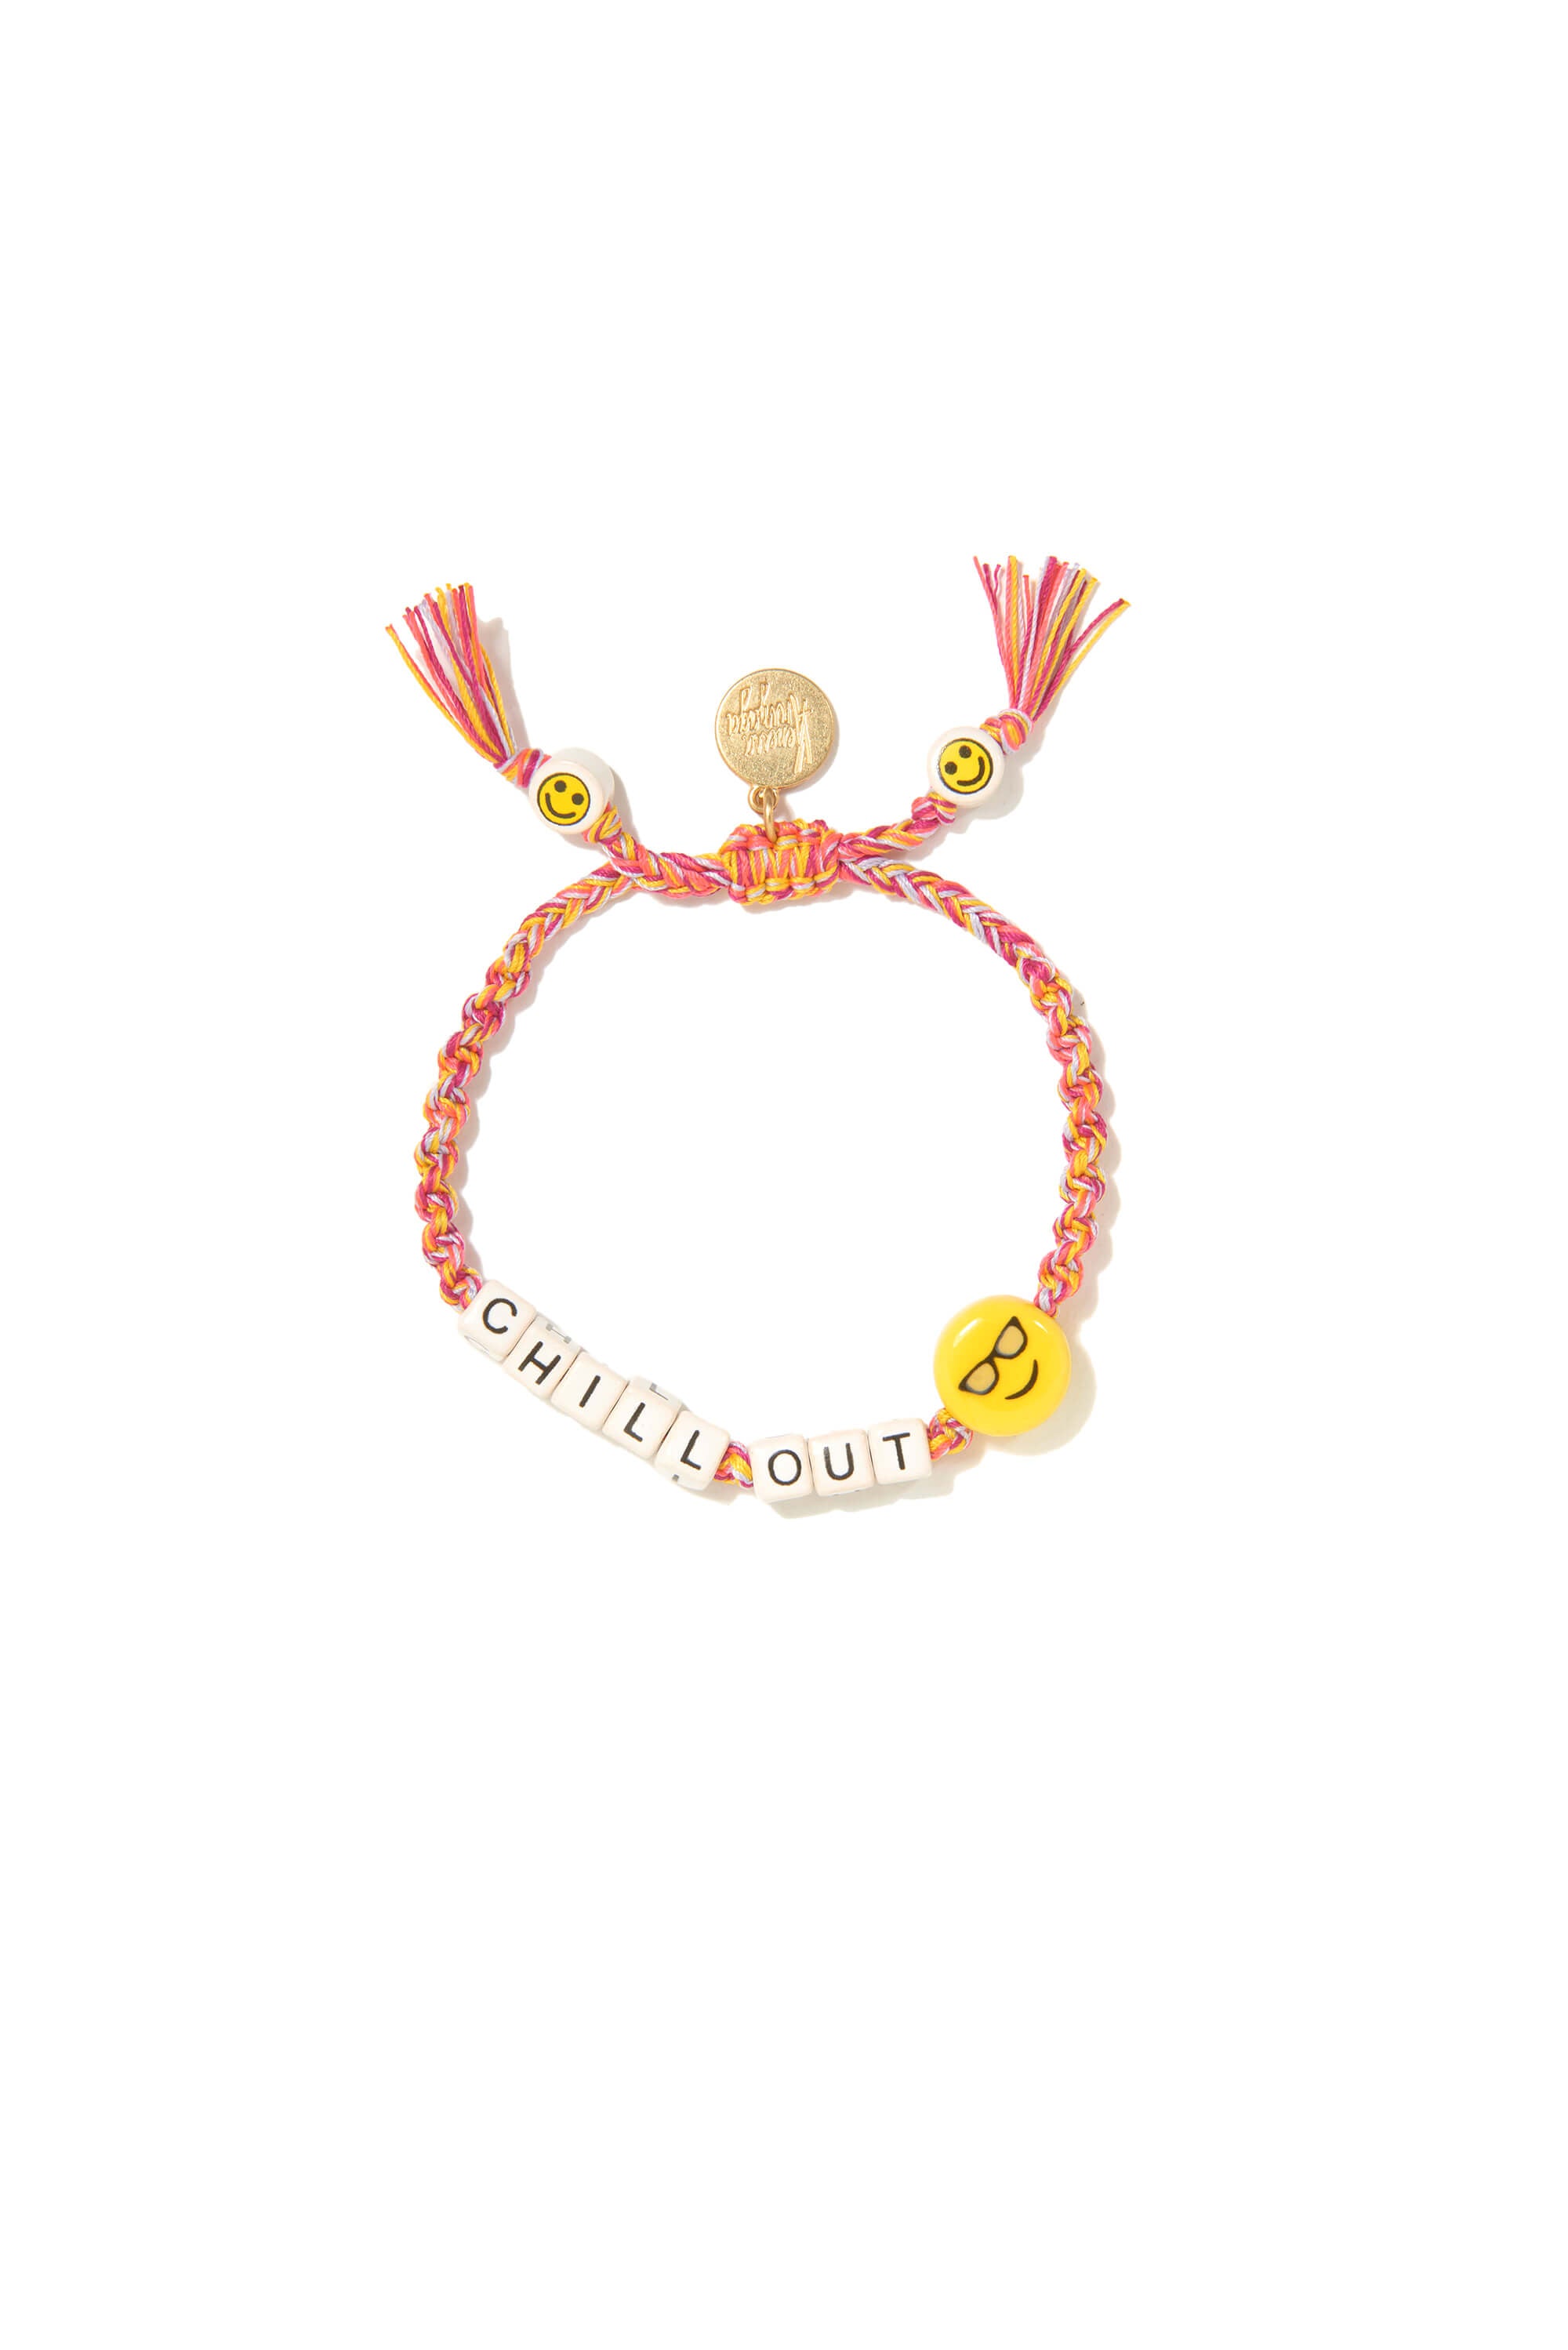 VA Chill out bracelet in orange with gold